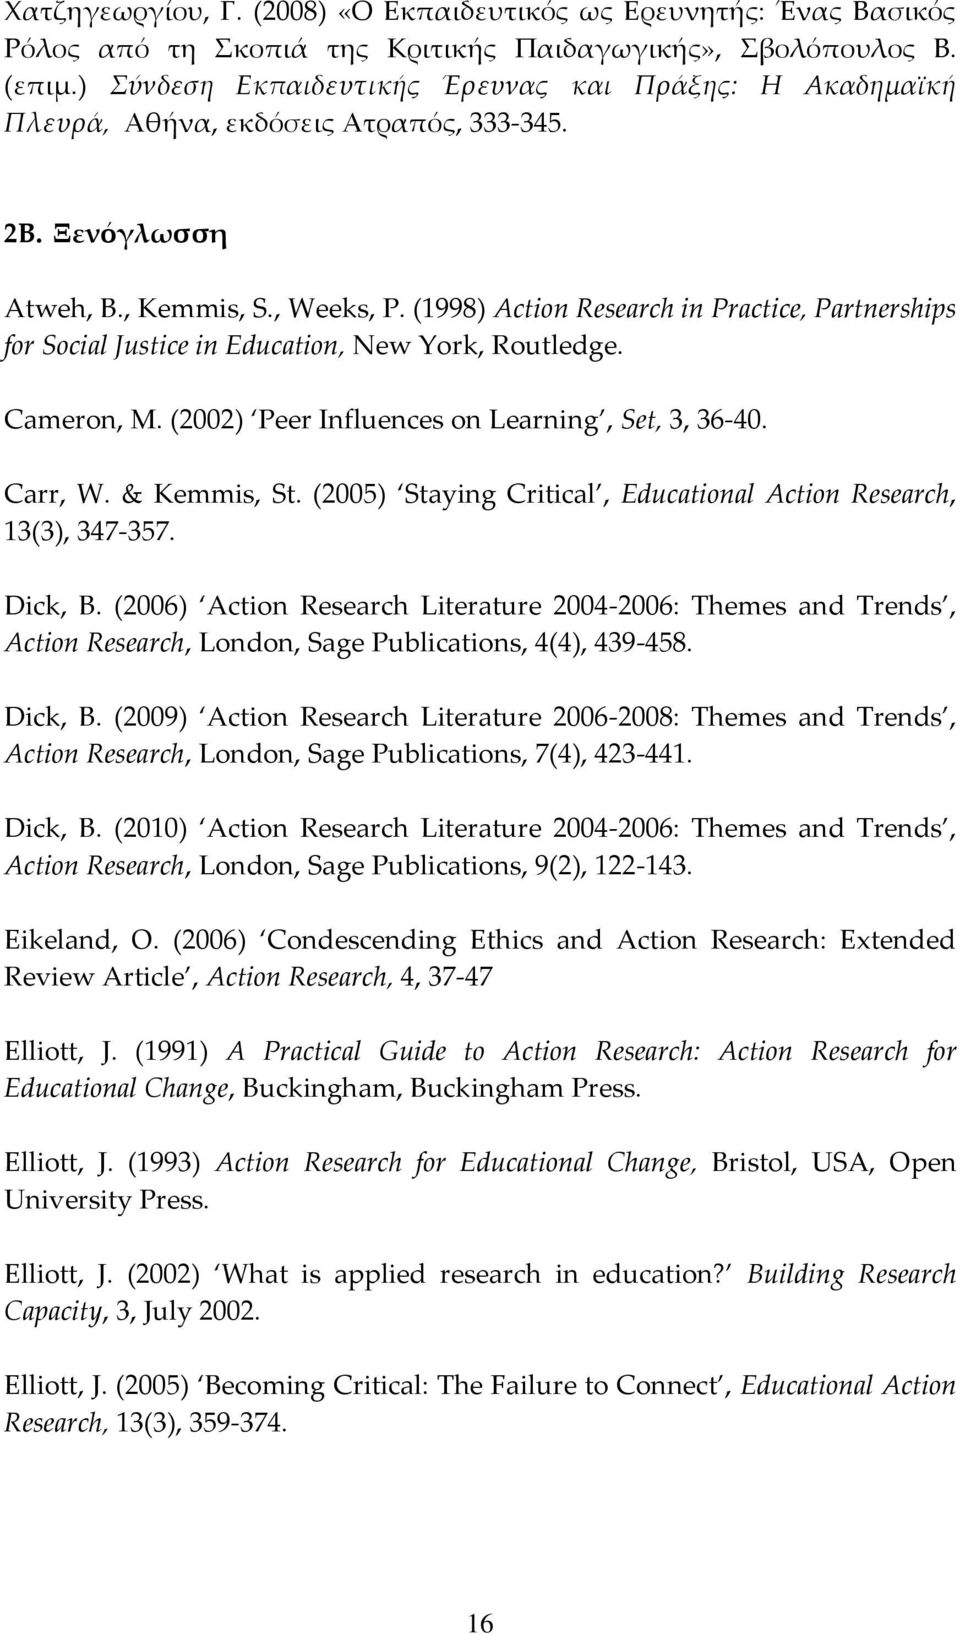 (1998) Action Research in Practice, Partnerships for Social Justice in Education, New York, Routledge. Cameron, M. (2002) Peer Influences on Learning, Set, 3, 36-40. Carr, W. & Kemmis, St.